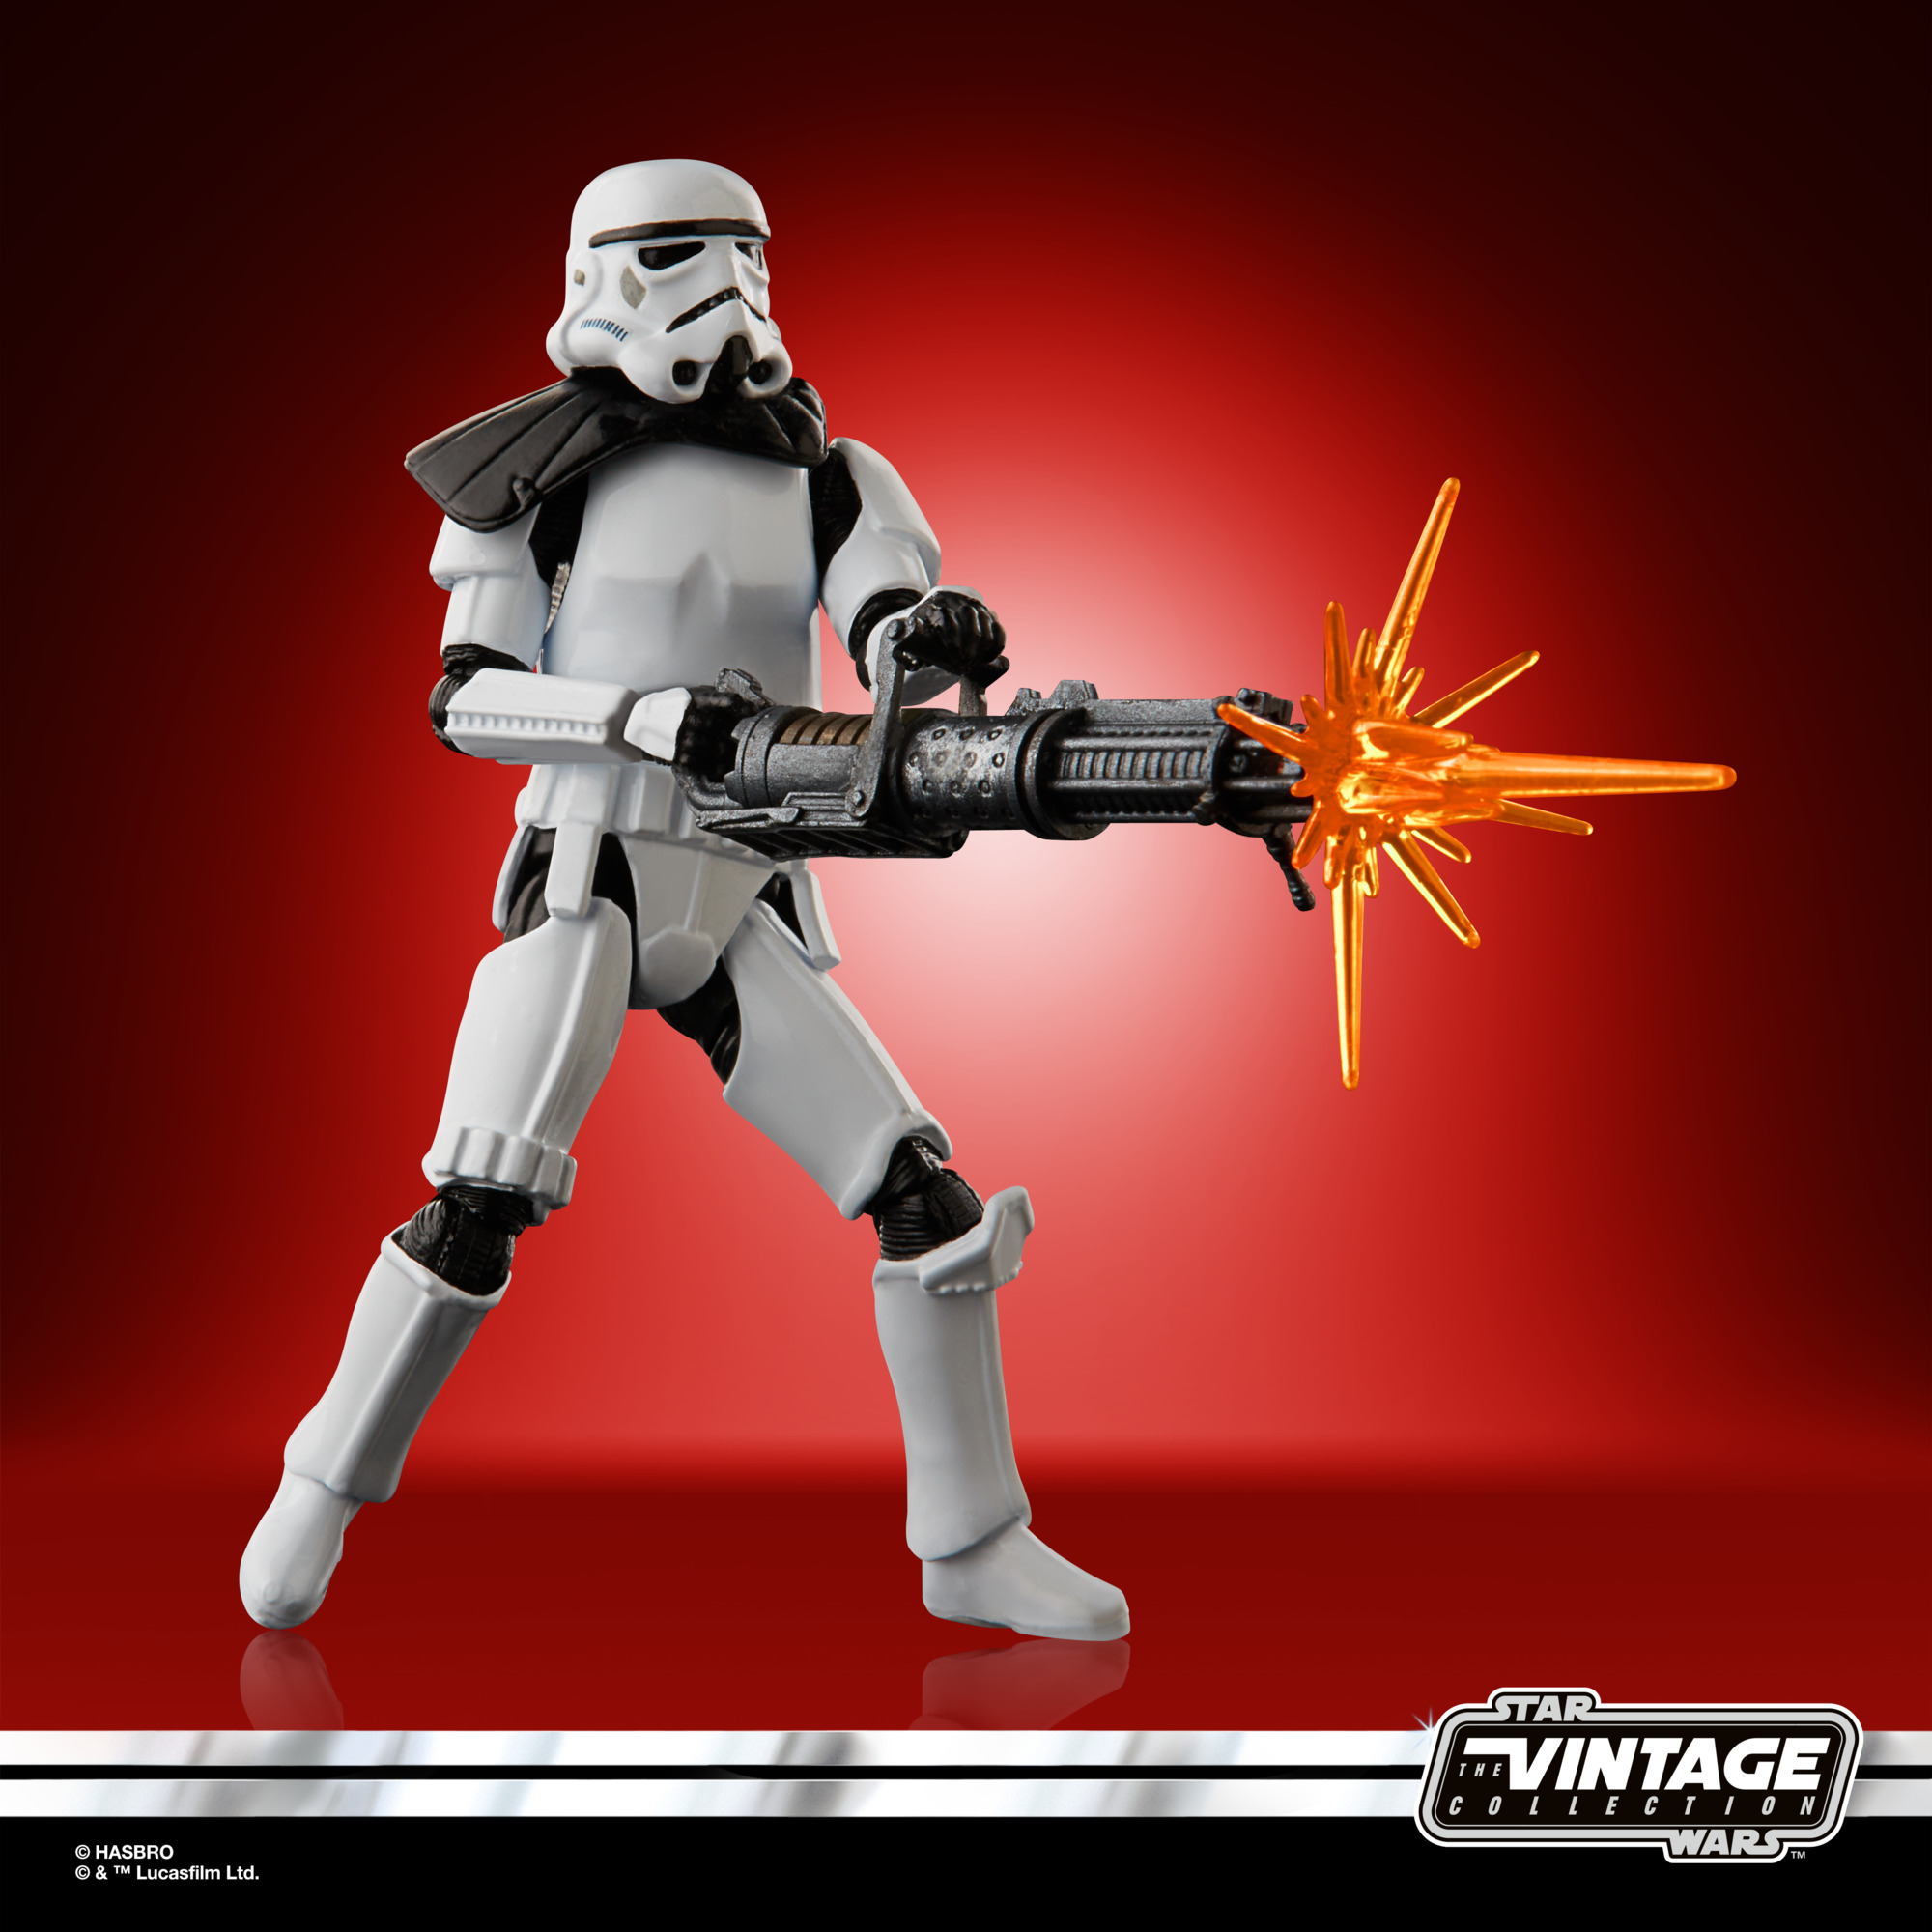 Star Wars The Vintage Collection Gaming Greats Heavy Assault Stormtrooper F55565L00 5010993968190